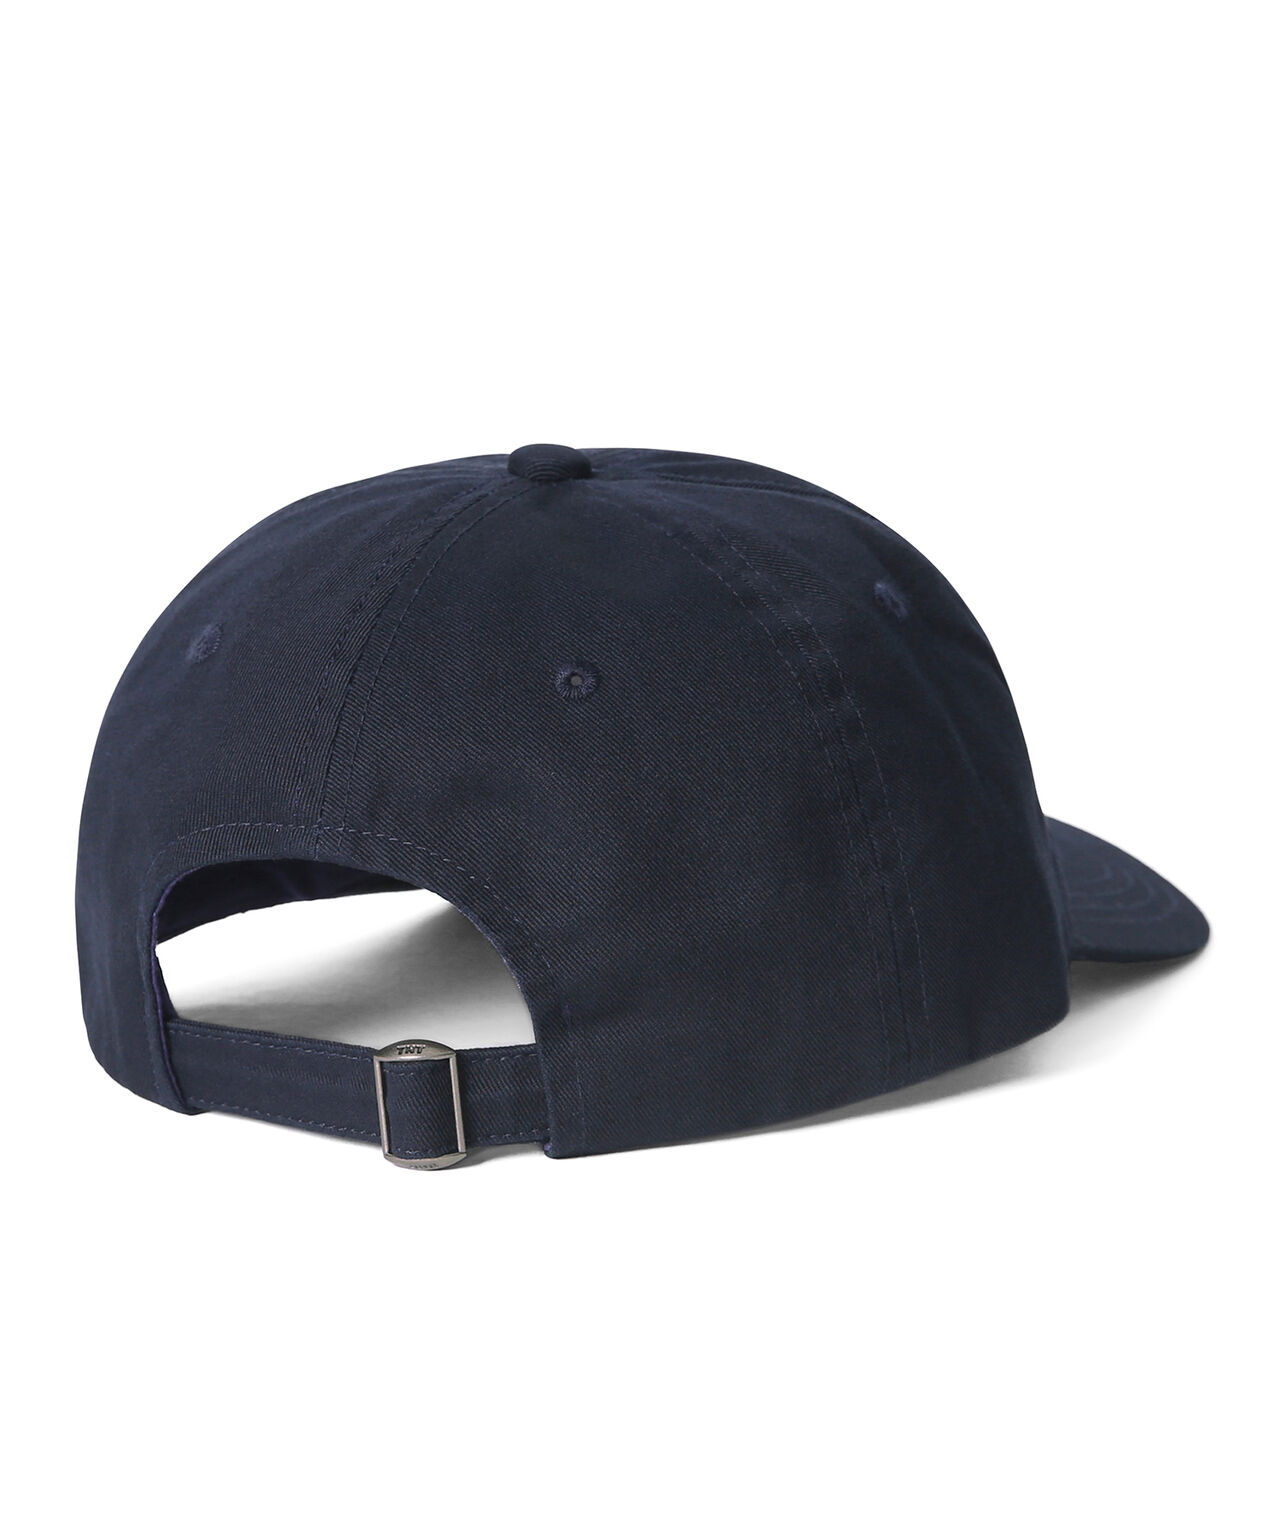 TNT BF Cap,Navy, large image number 2